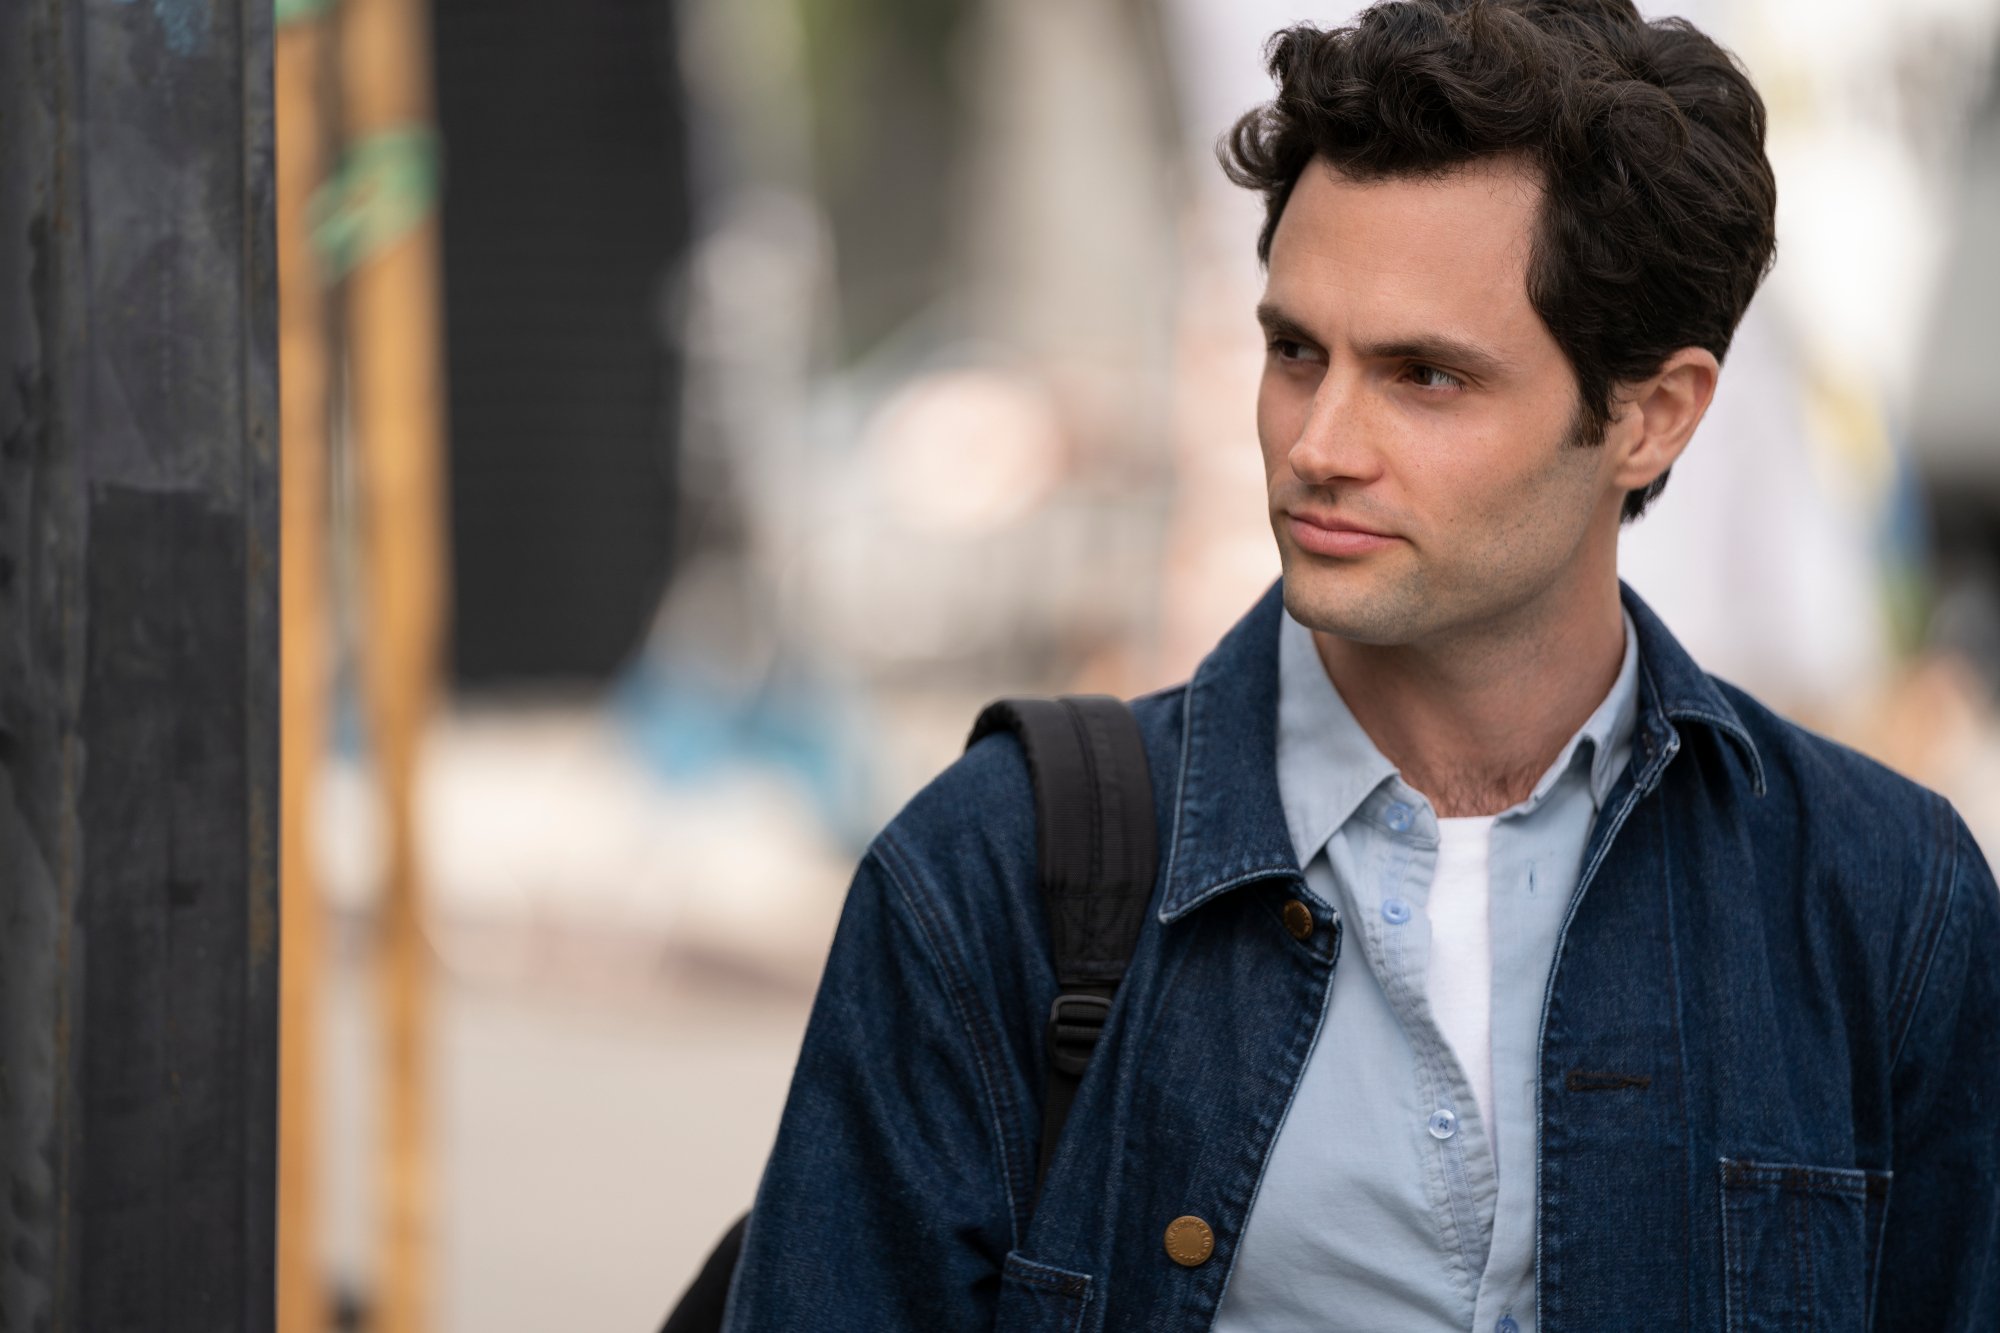 Penn Badgley as Joe in 'You' Season 2. He's wearing a blue denim jacket and blue button-up shirt and looking at something off-screen. The season 3 teaser trailer sees him becoming a dad.